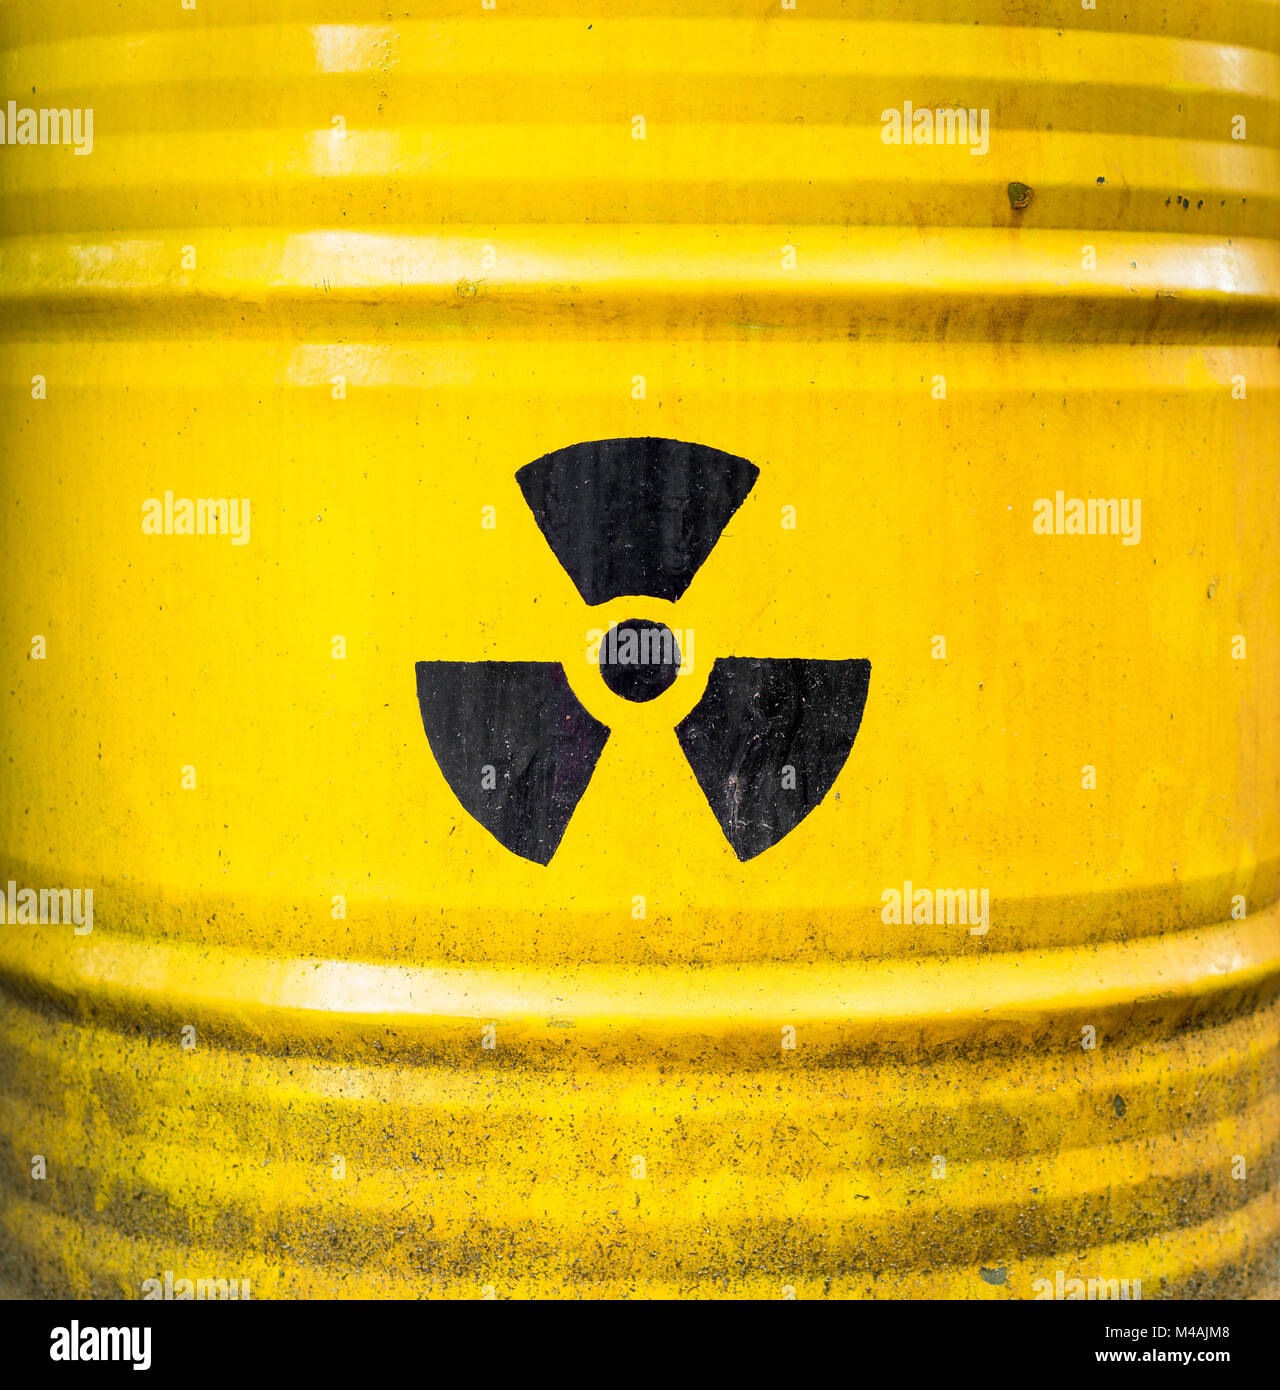 Radioactive sign, icon and symbol on yellow nuclear waste barrel. Stock Photo